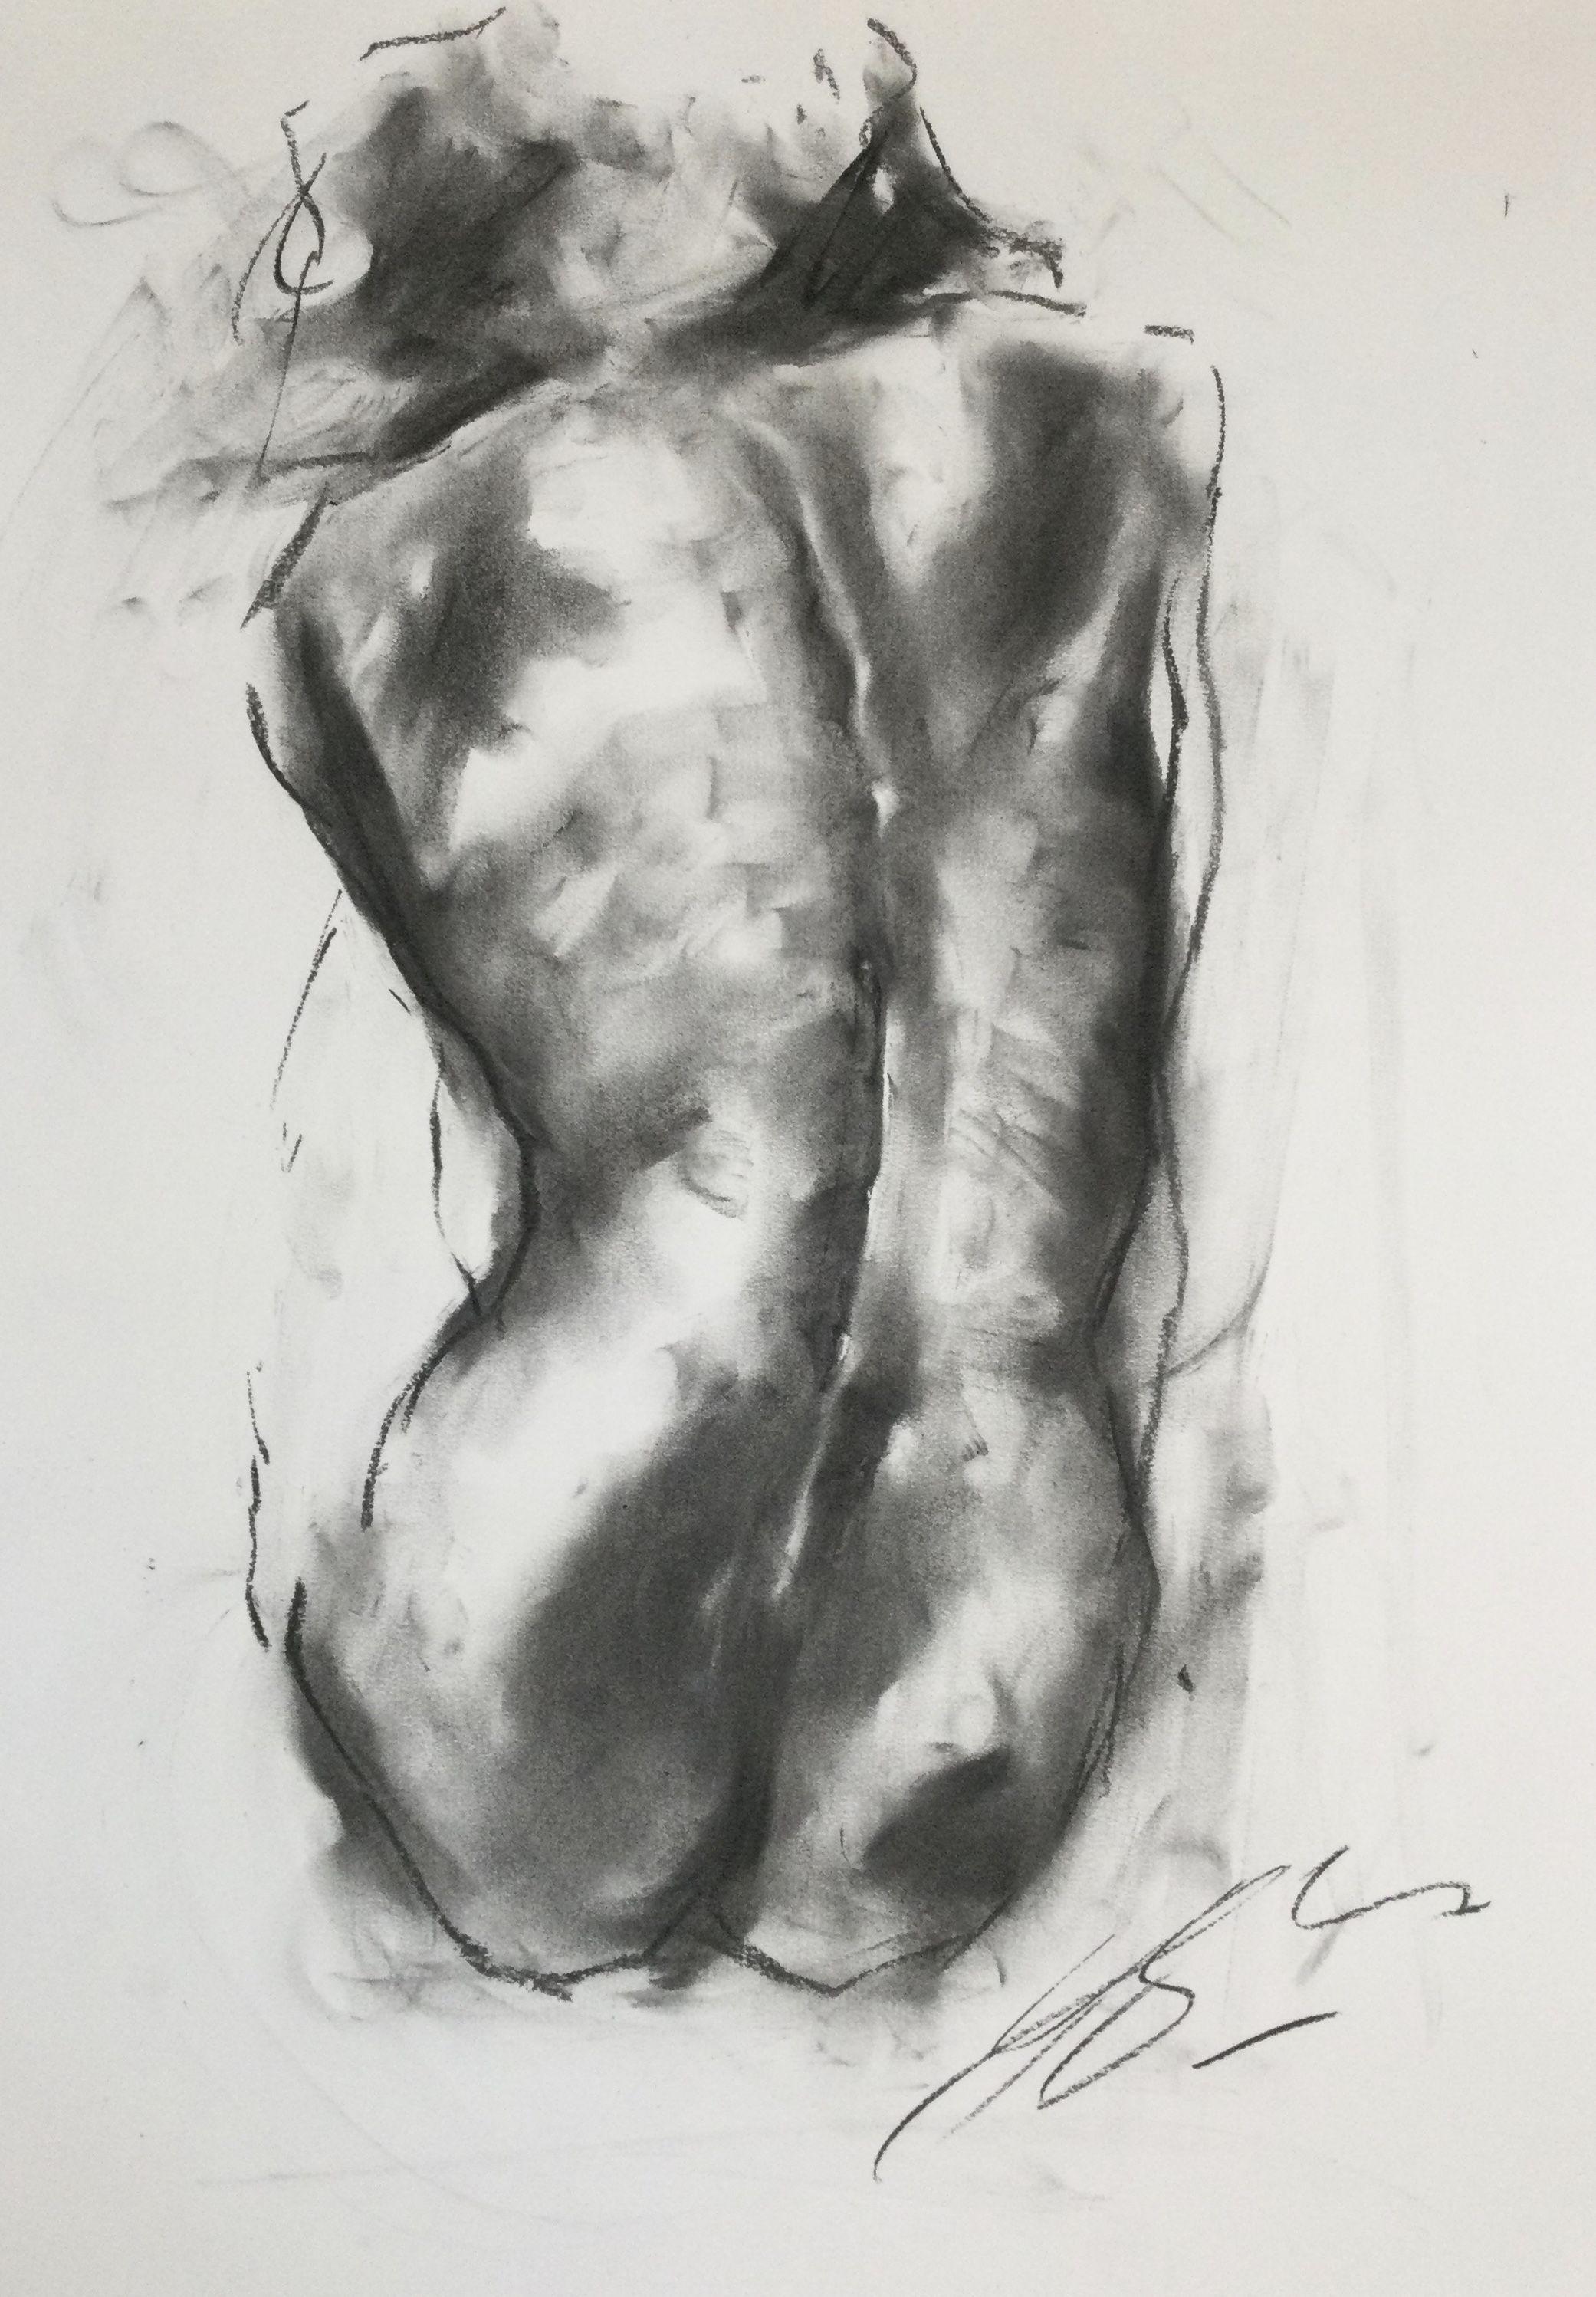 Undone, Drawing, Charcoal on Paper - Art by James Shipton